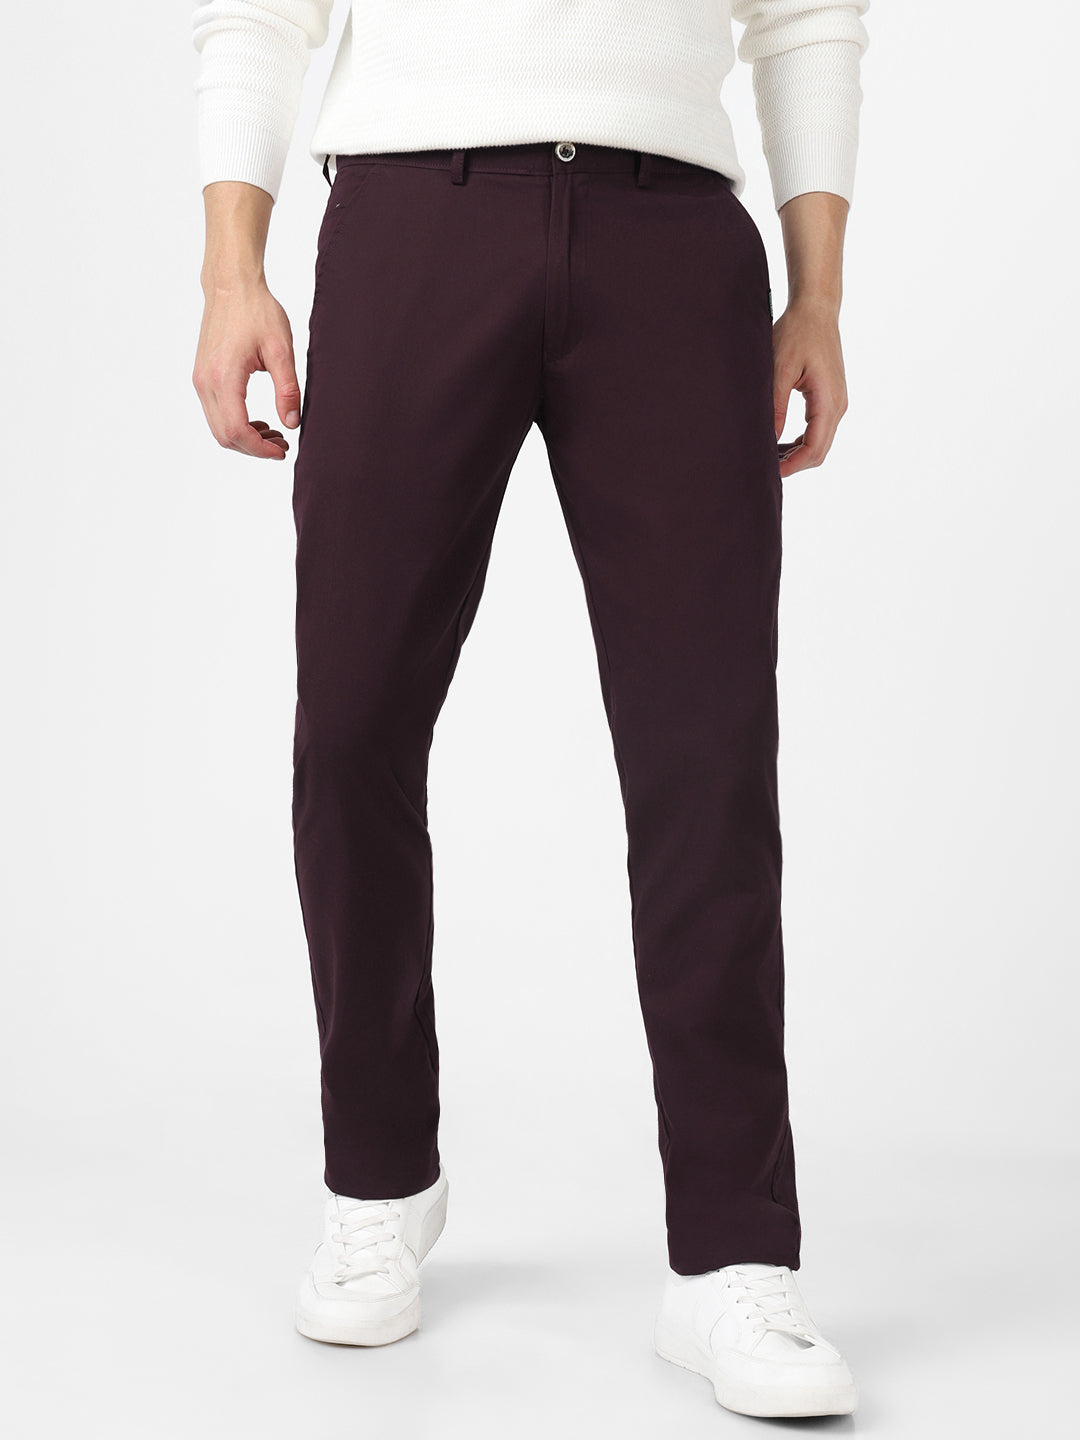 Men's Maroon Cotton Light Weight Non-Stretch Slim Fit Casual Trousers